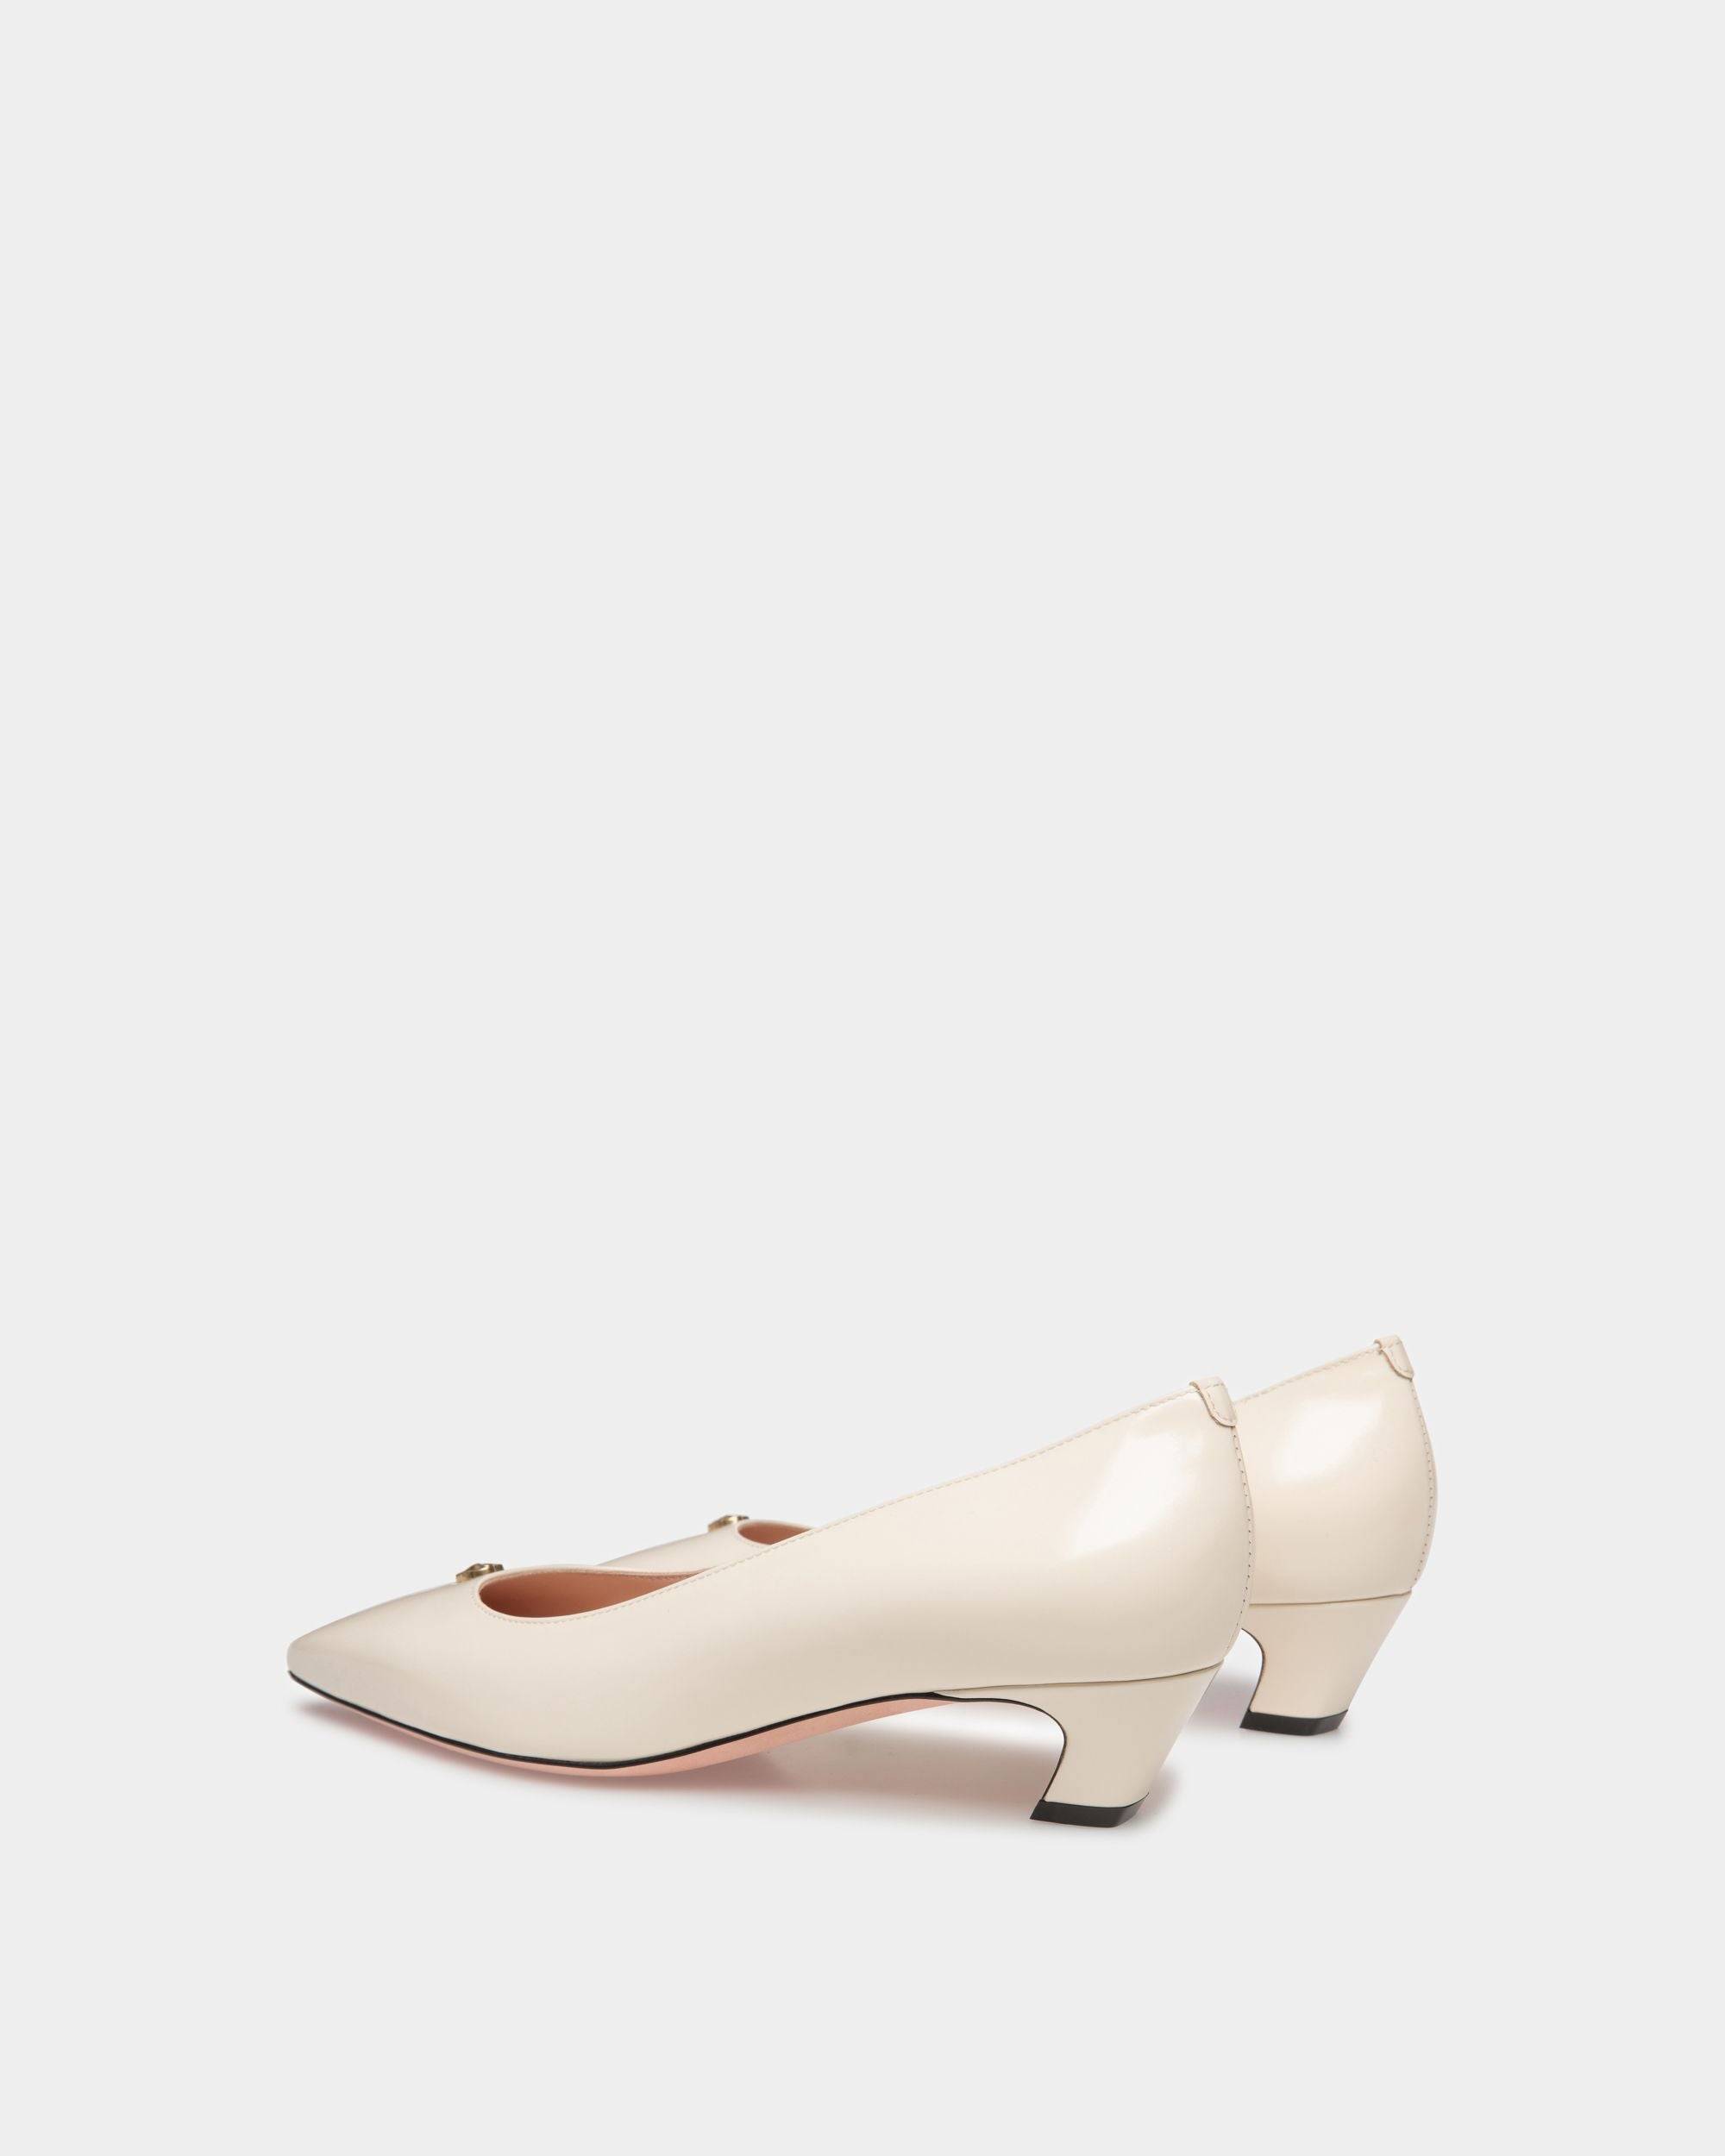 Sylt | Women's Pump in White Leather | Bally | Still Life 3/4 Back